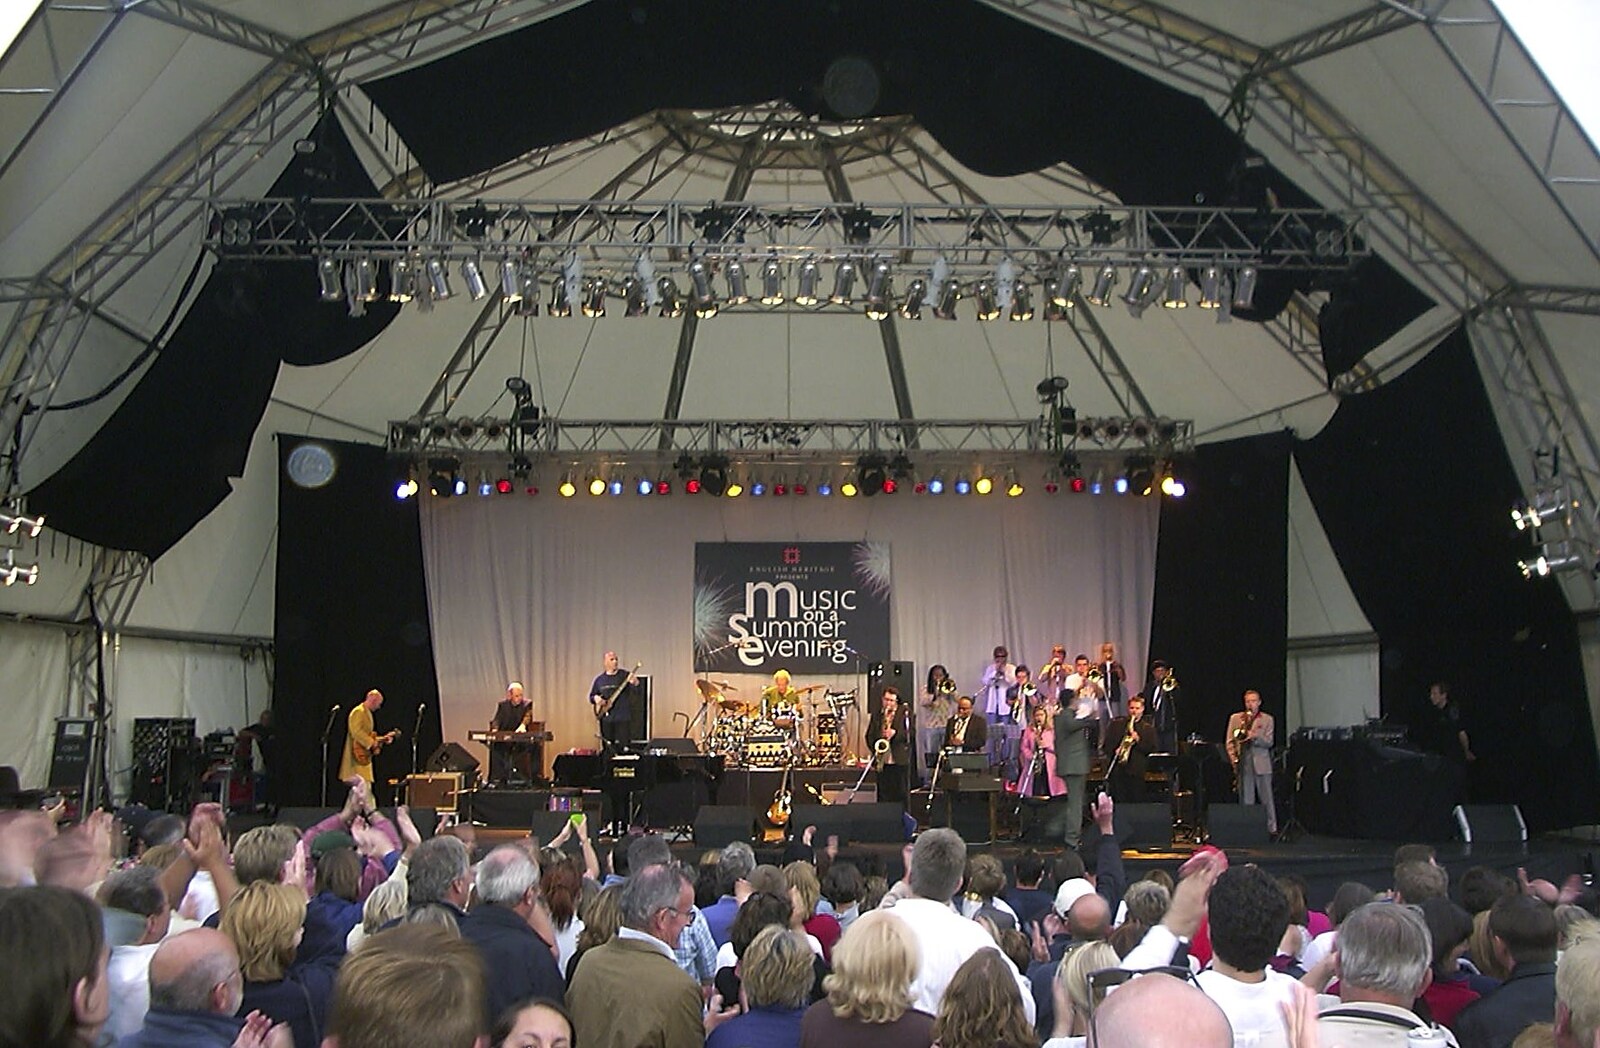 3G Lab at Jools Holland, Audley End, Saffron Walden, Essex - 25th July 2004: The band and its massive horn section